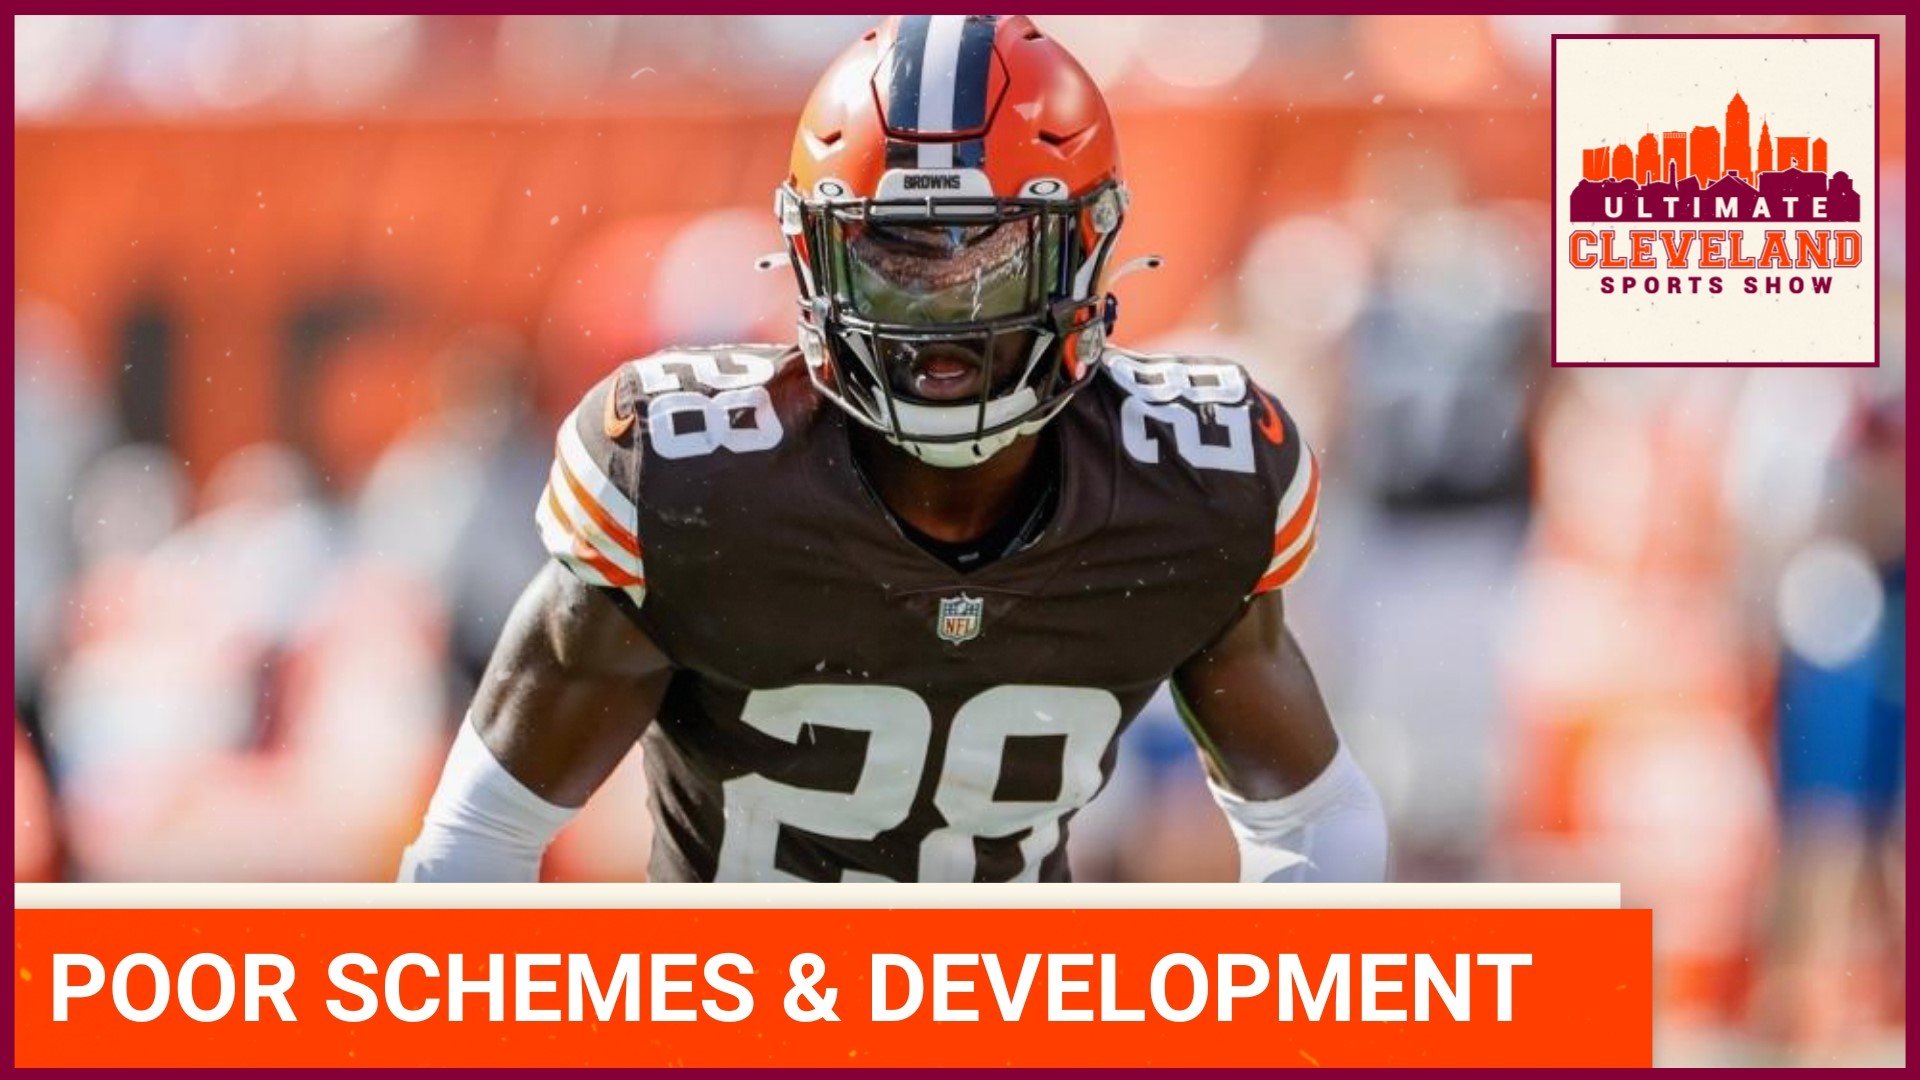 The Browns are one of the leagues BIGGEST disappointments, and poor scheming and development by coaches play a huge role.